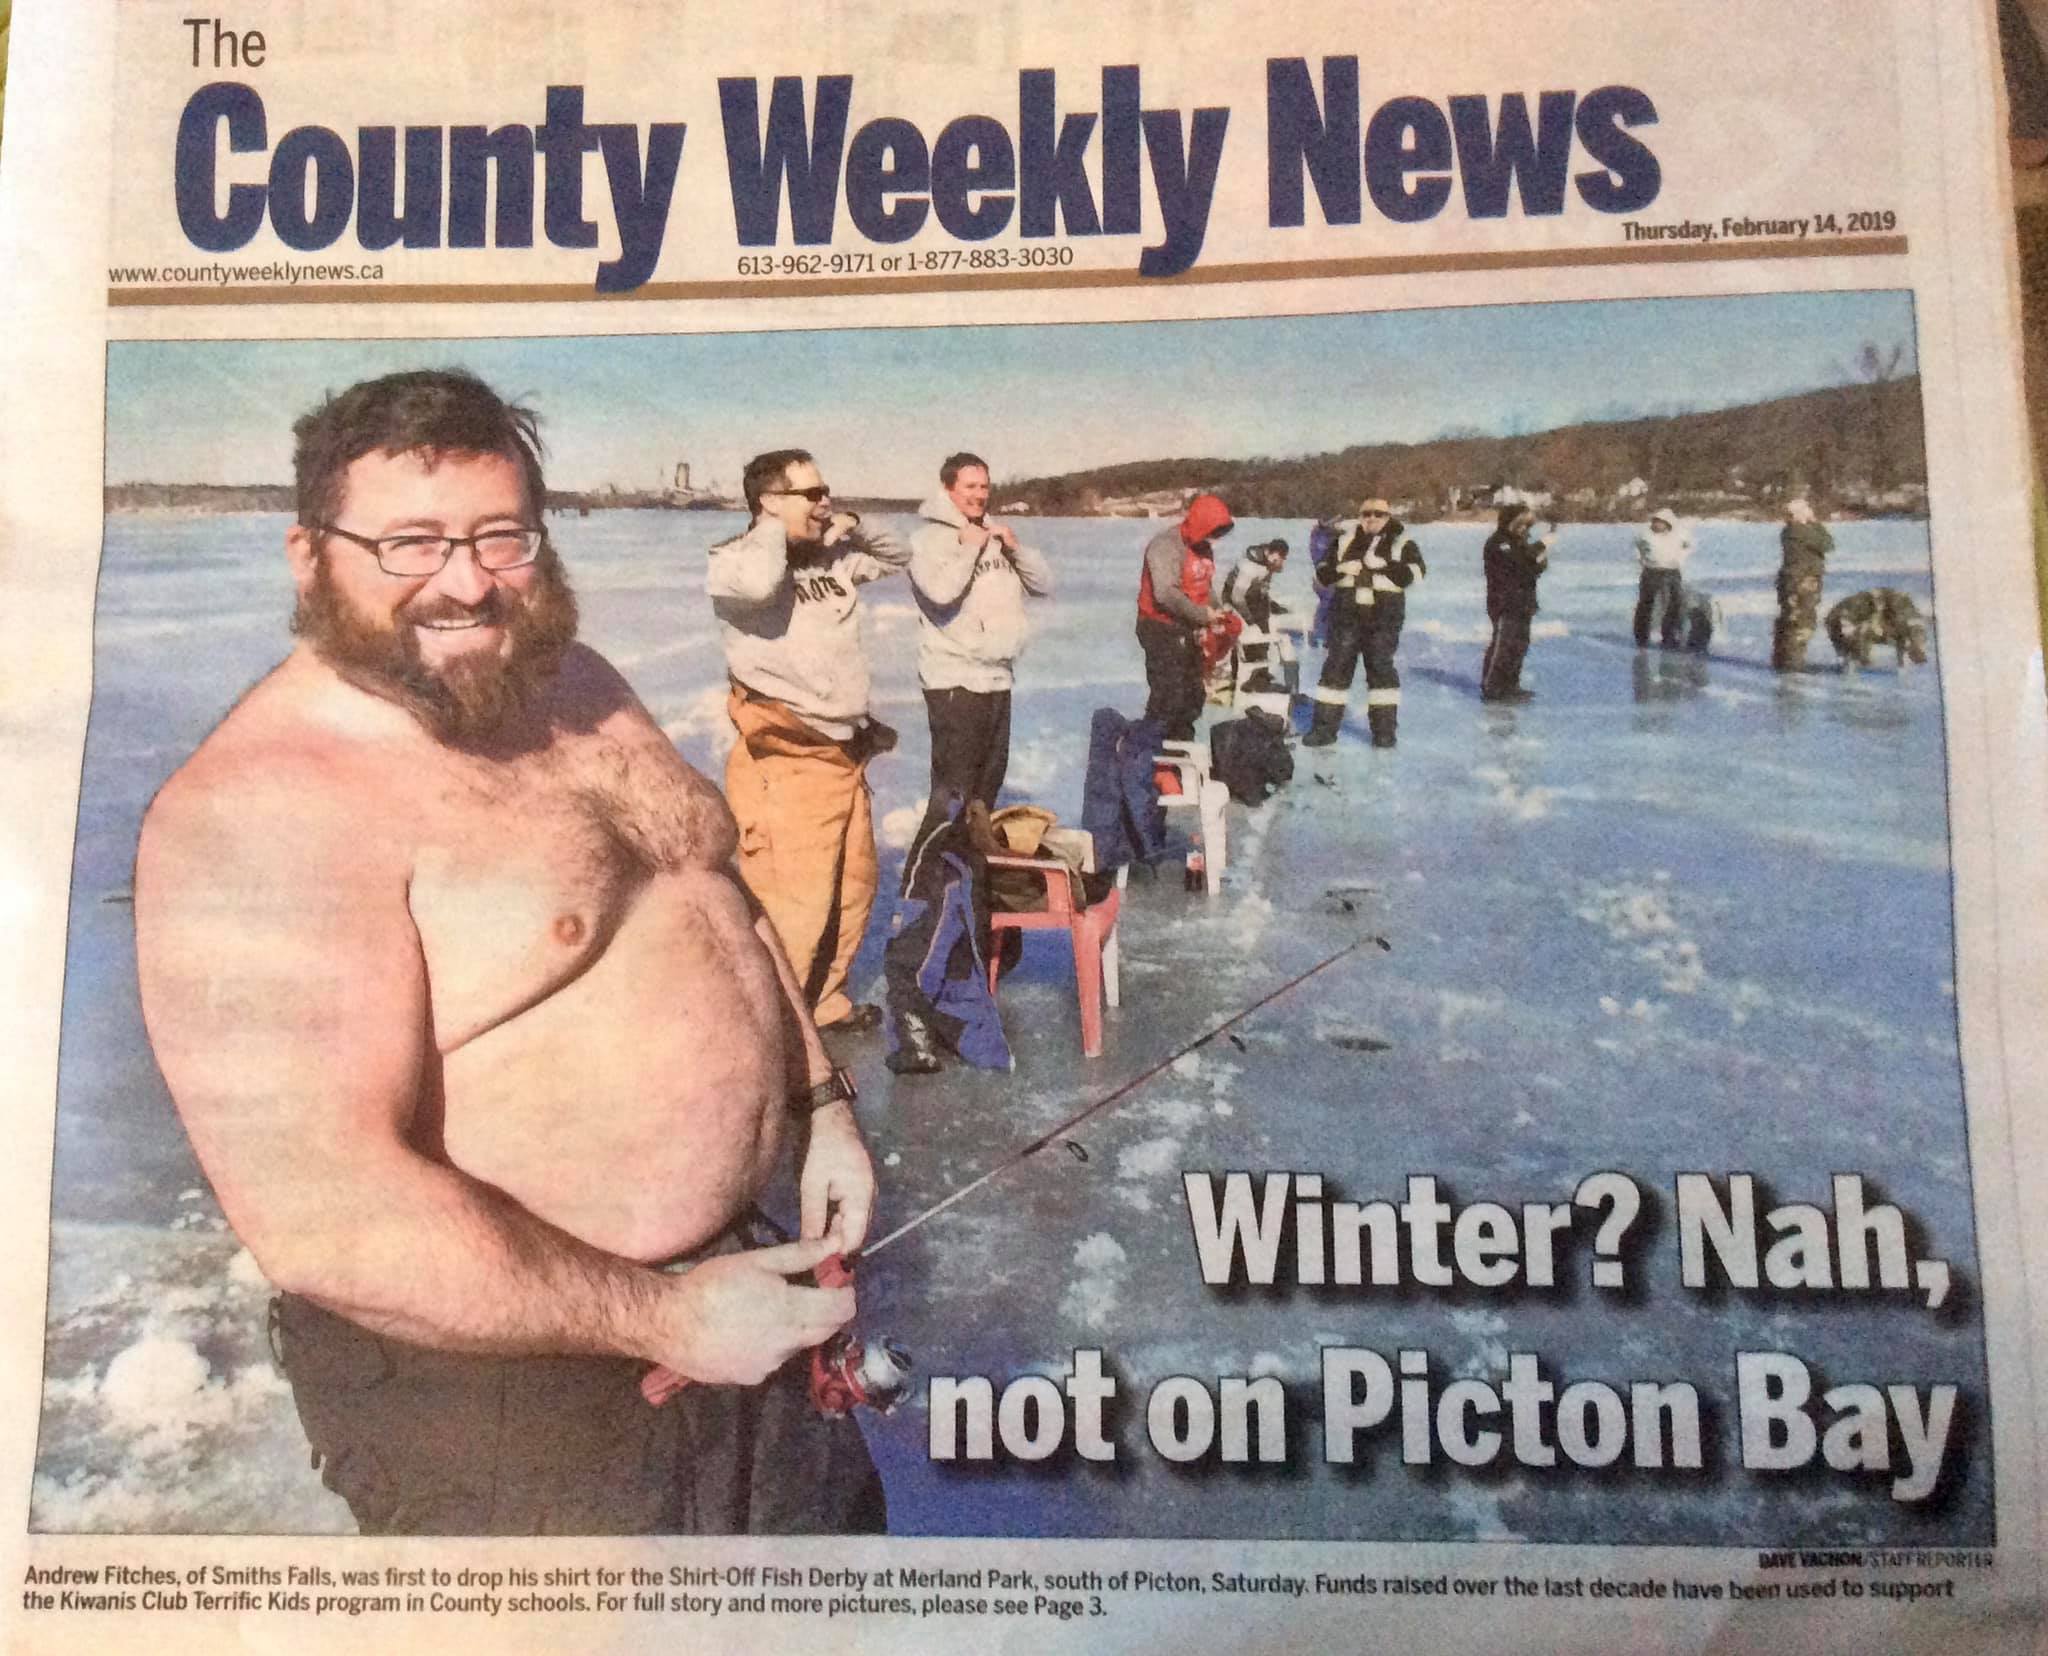 10th Annual Ice Fishing Derby Hits the News